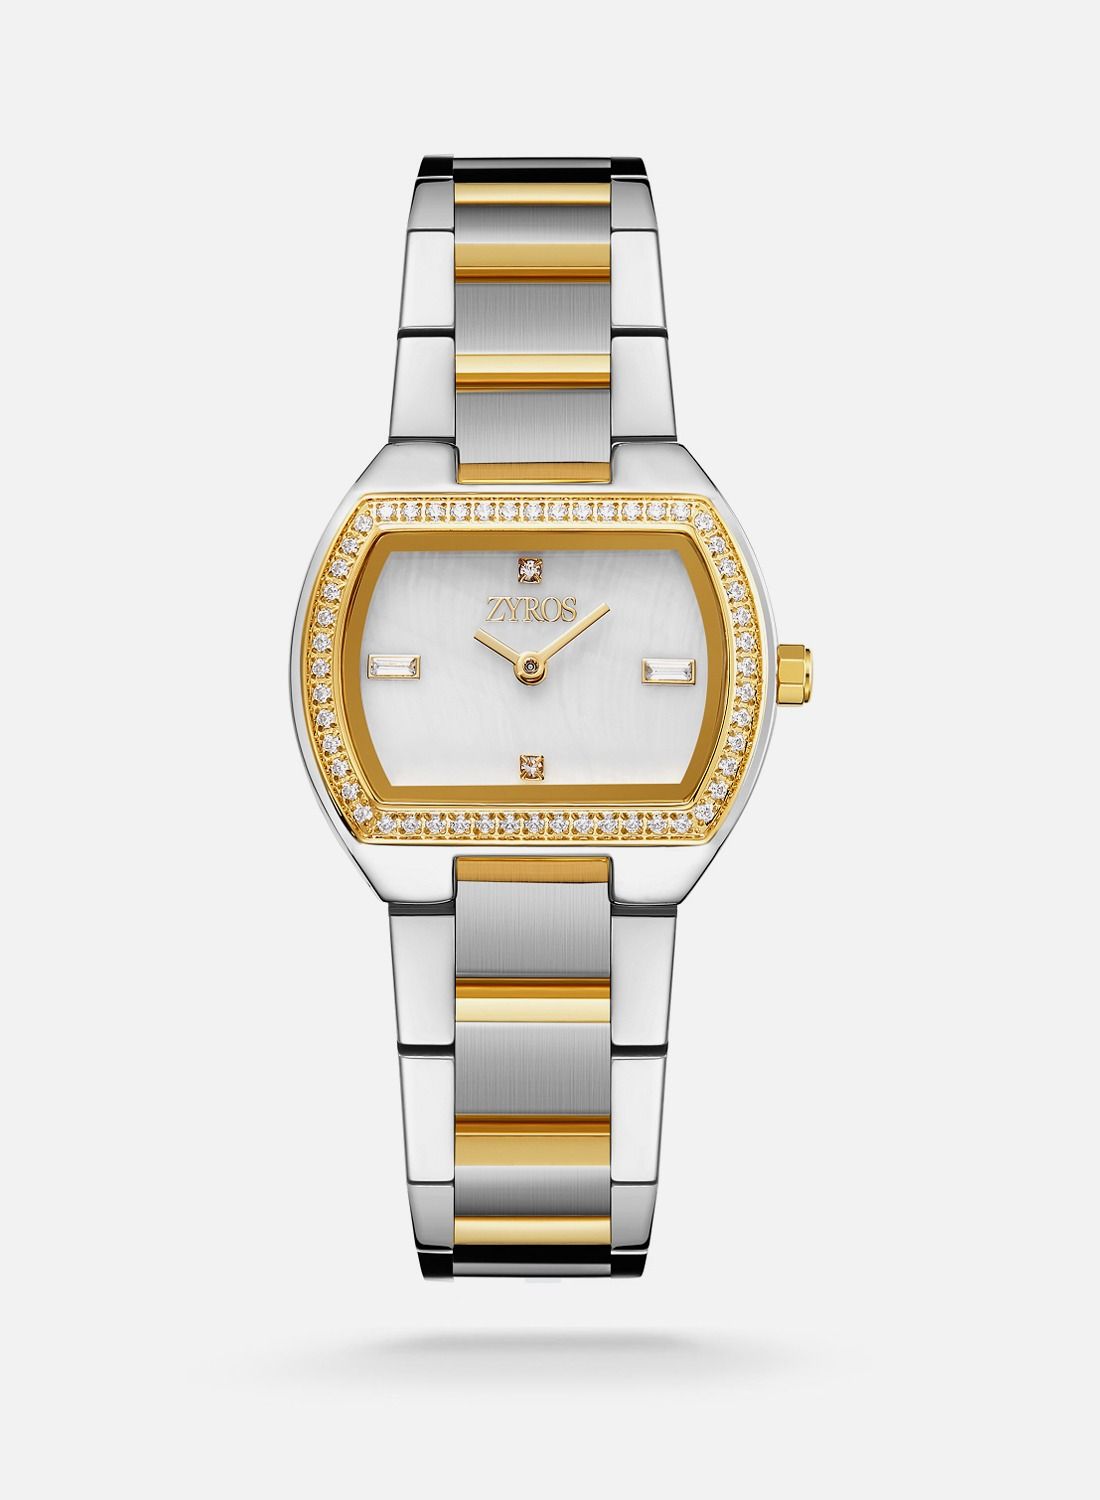 Elegant women's watch in silver and gold - Zyros official website We  uniquely design watches and bags in Saudi